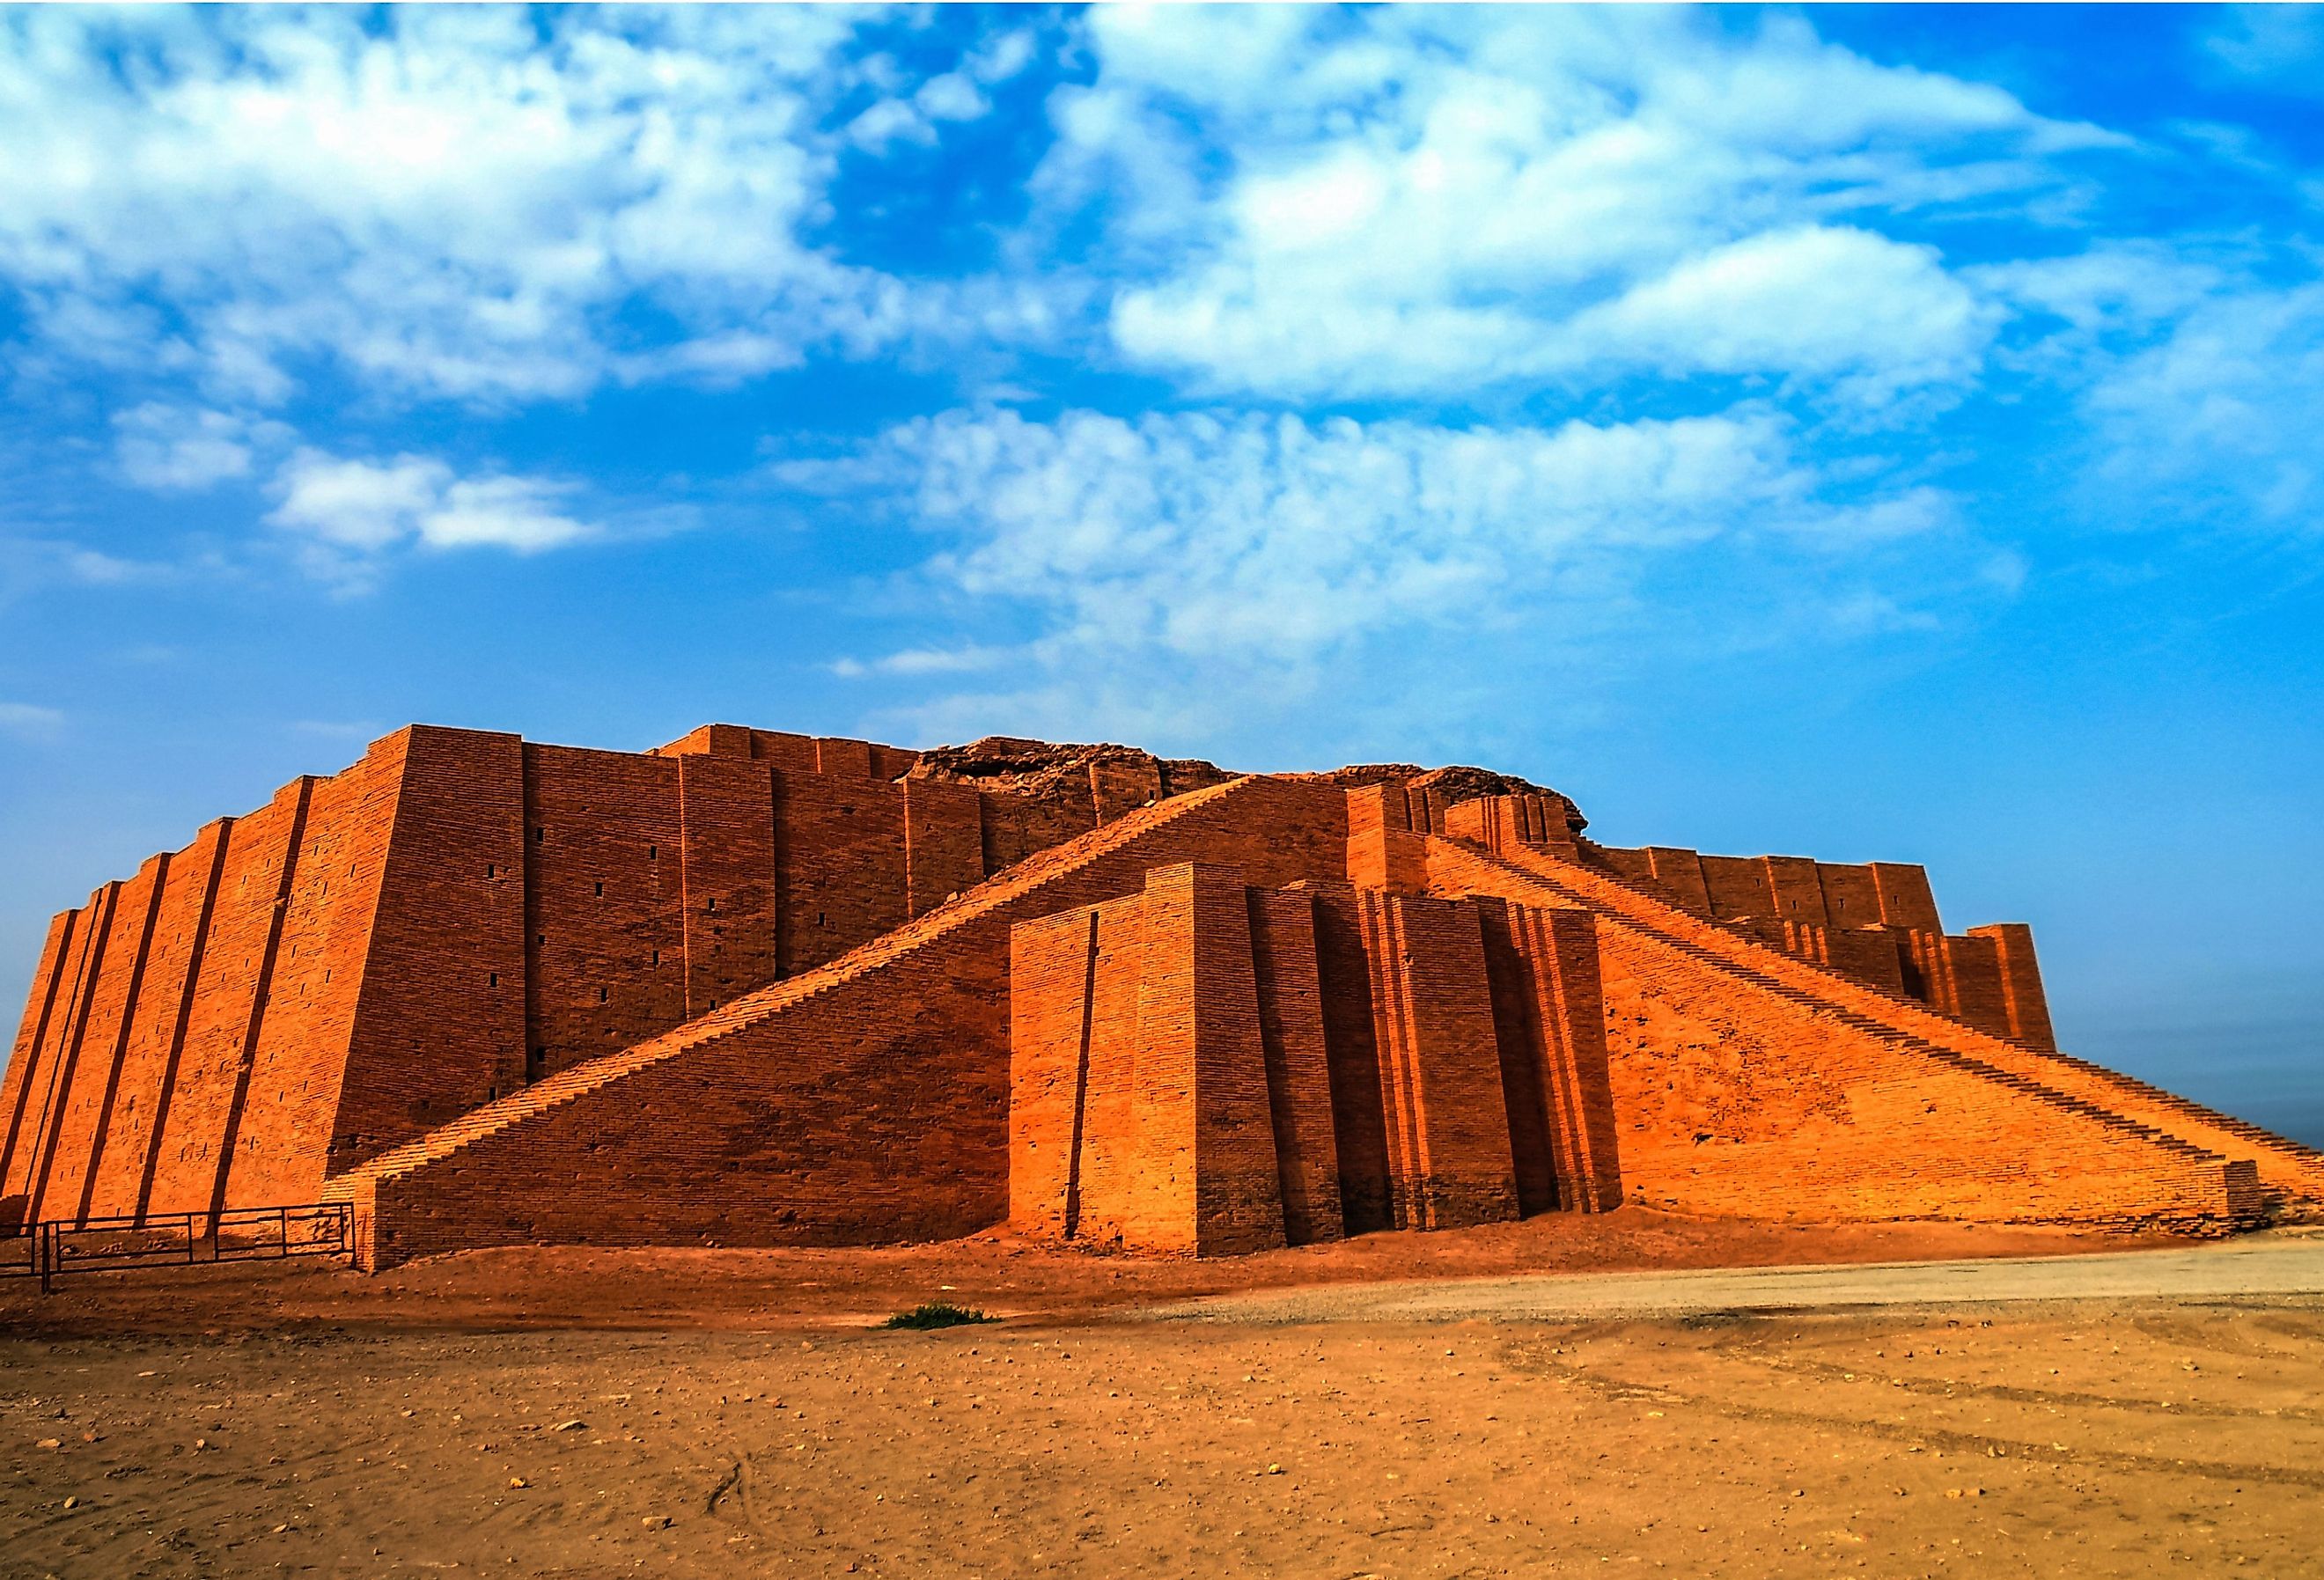 Many Sumerian cities were dominated by these large religious and political buildings called Ziggurats. Image credit Bildagentur Zoonar GmbH via Shutterstock